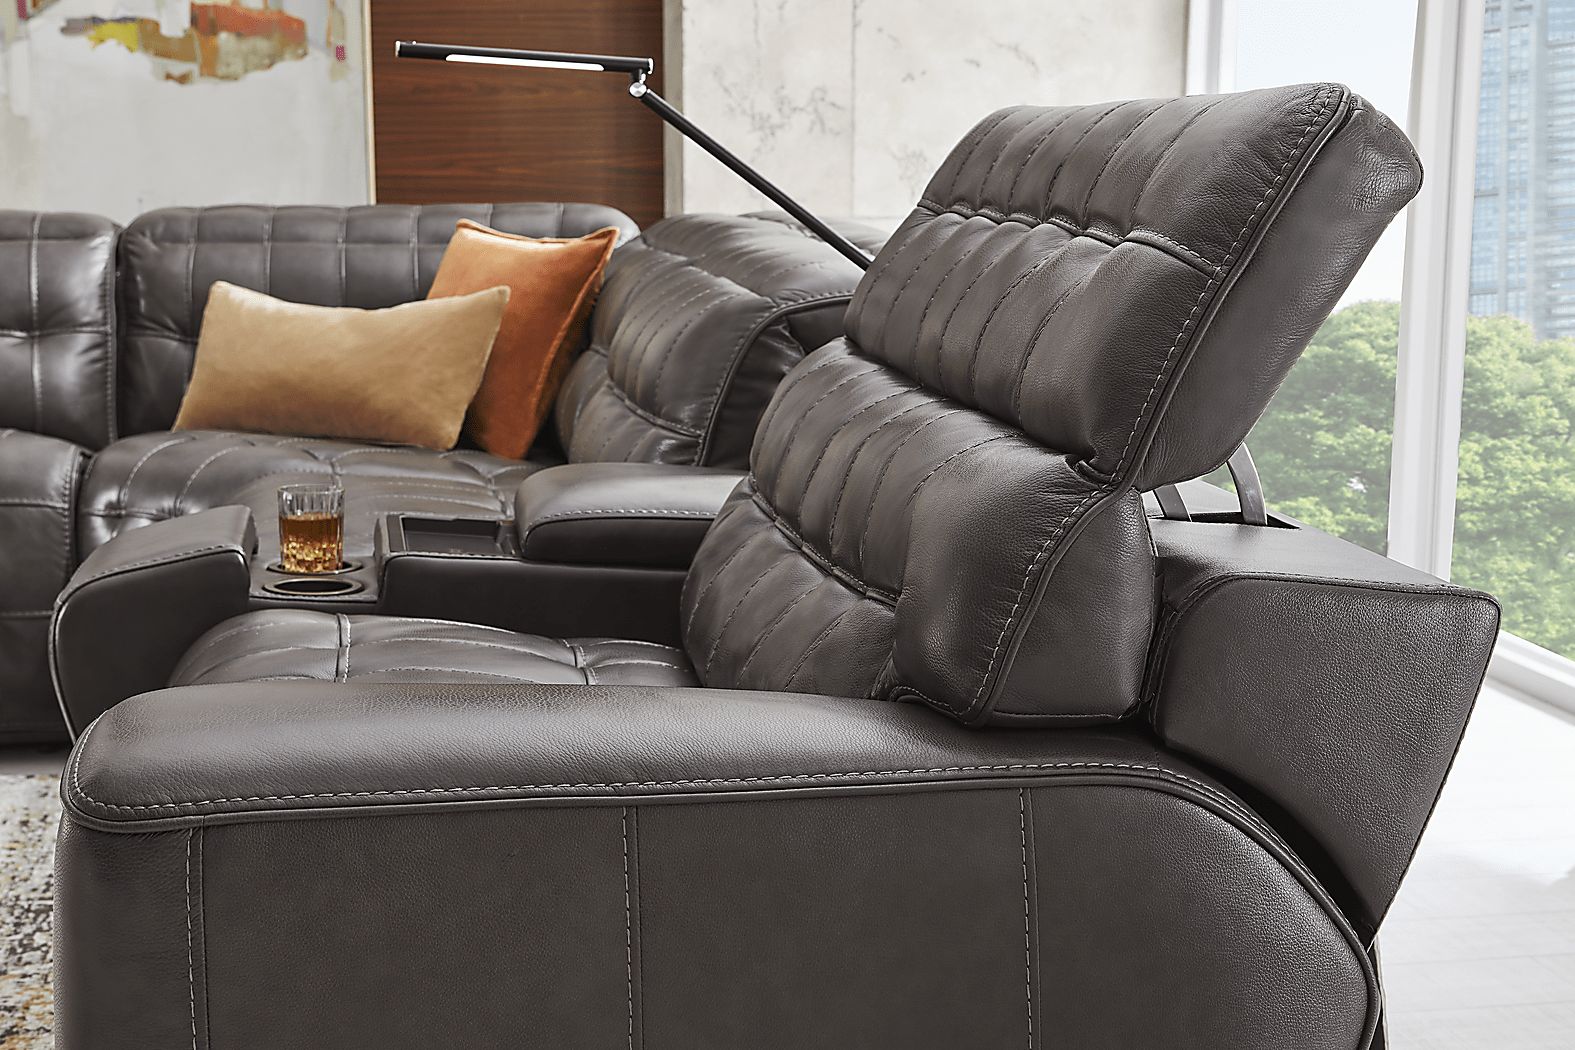 Maddox Manor Dark Gray Leather 10 Pc Dual Power Reclining Sectional Living Room